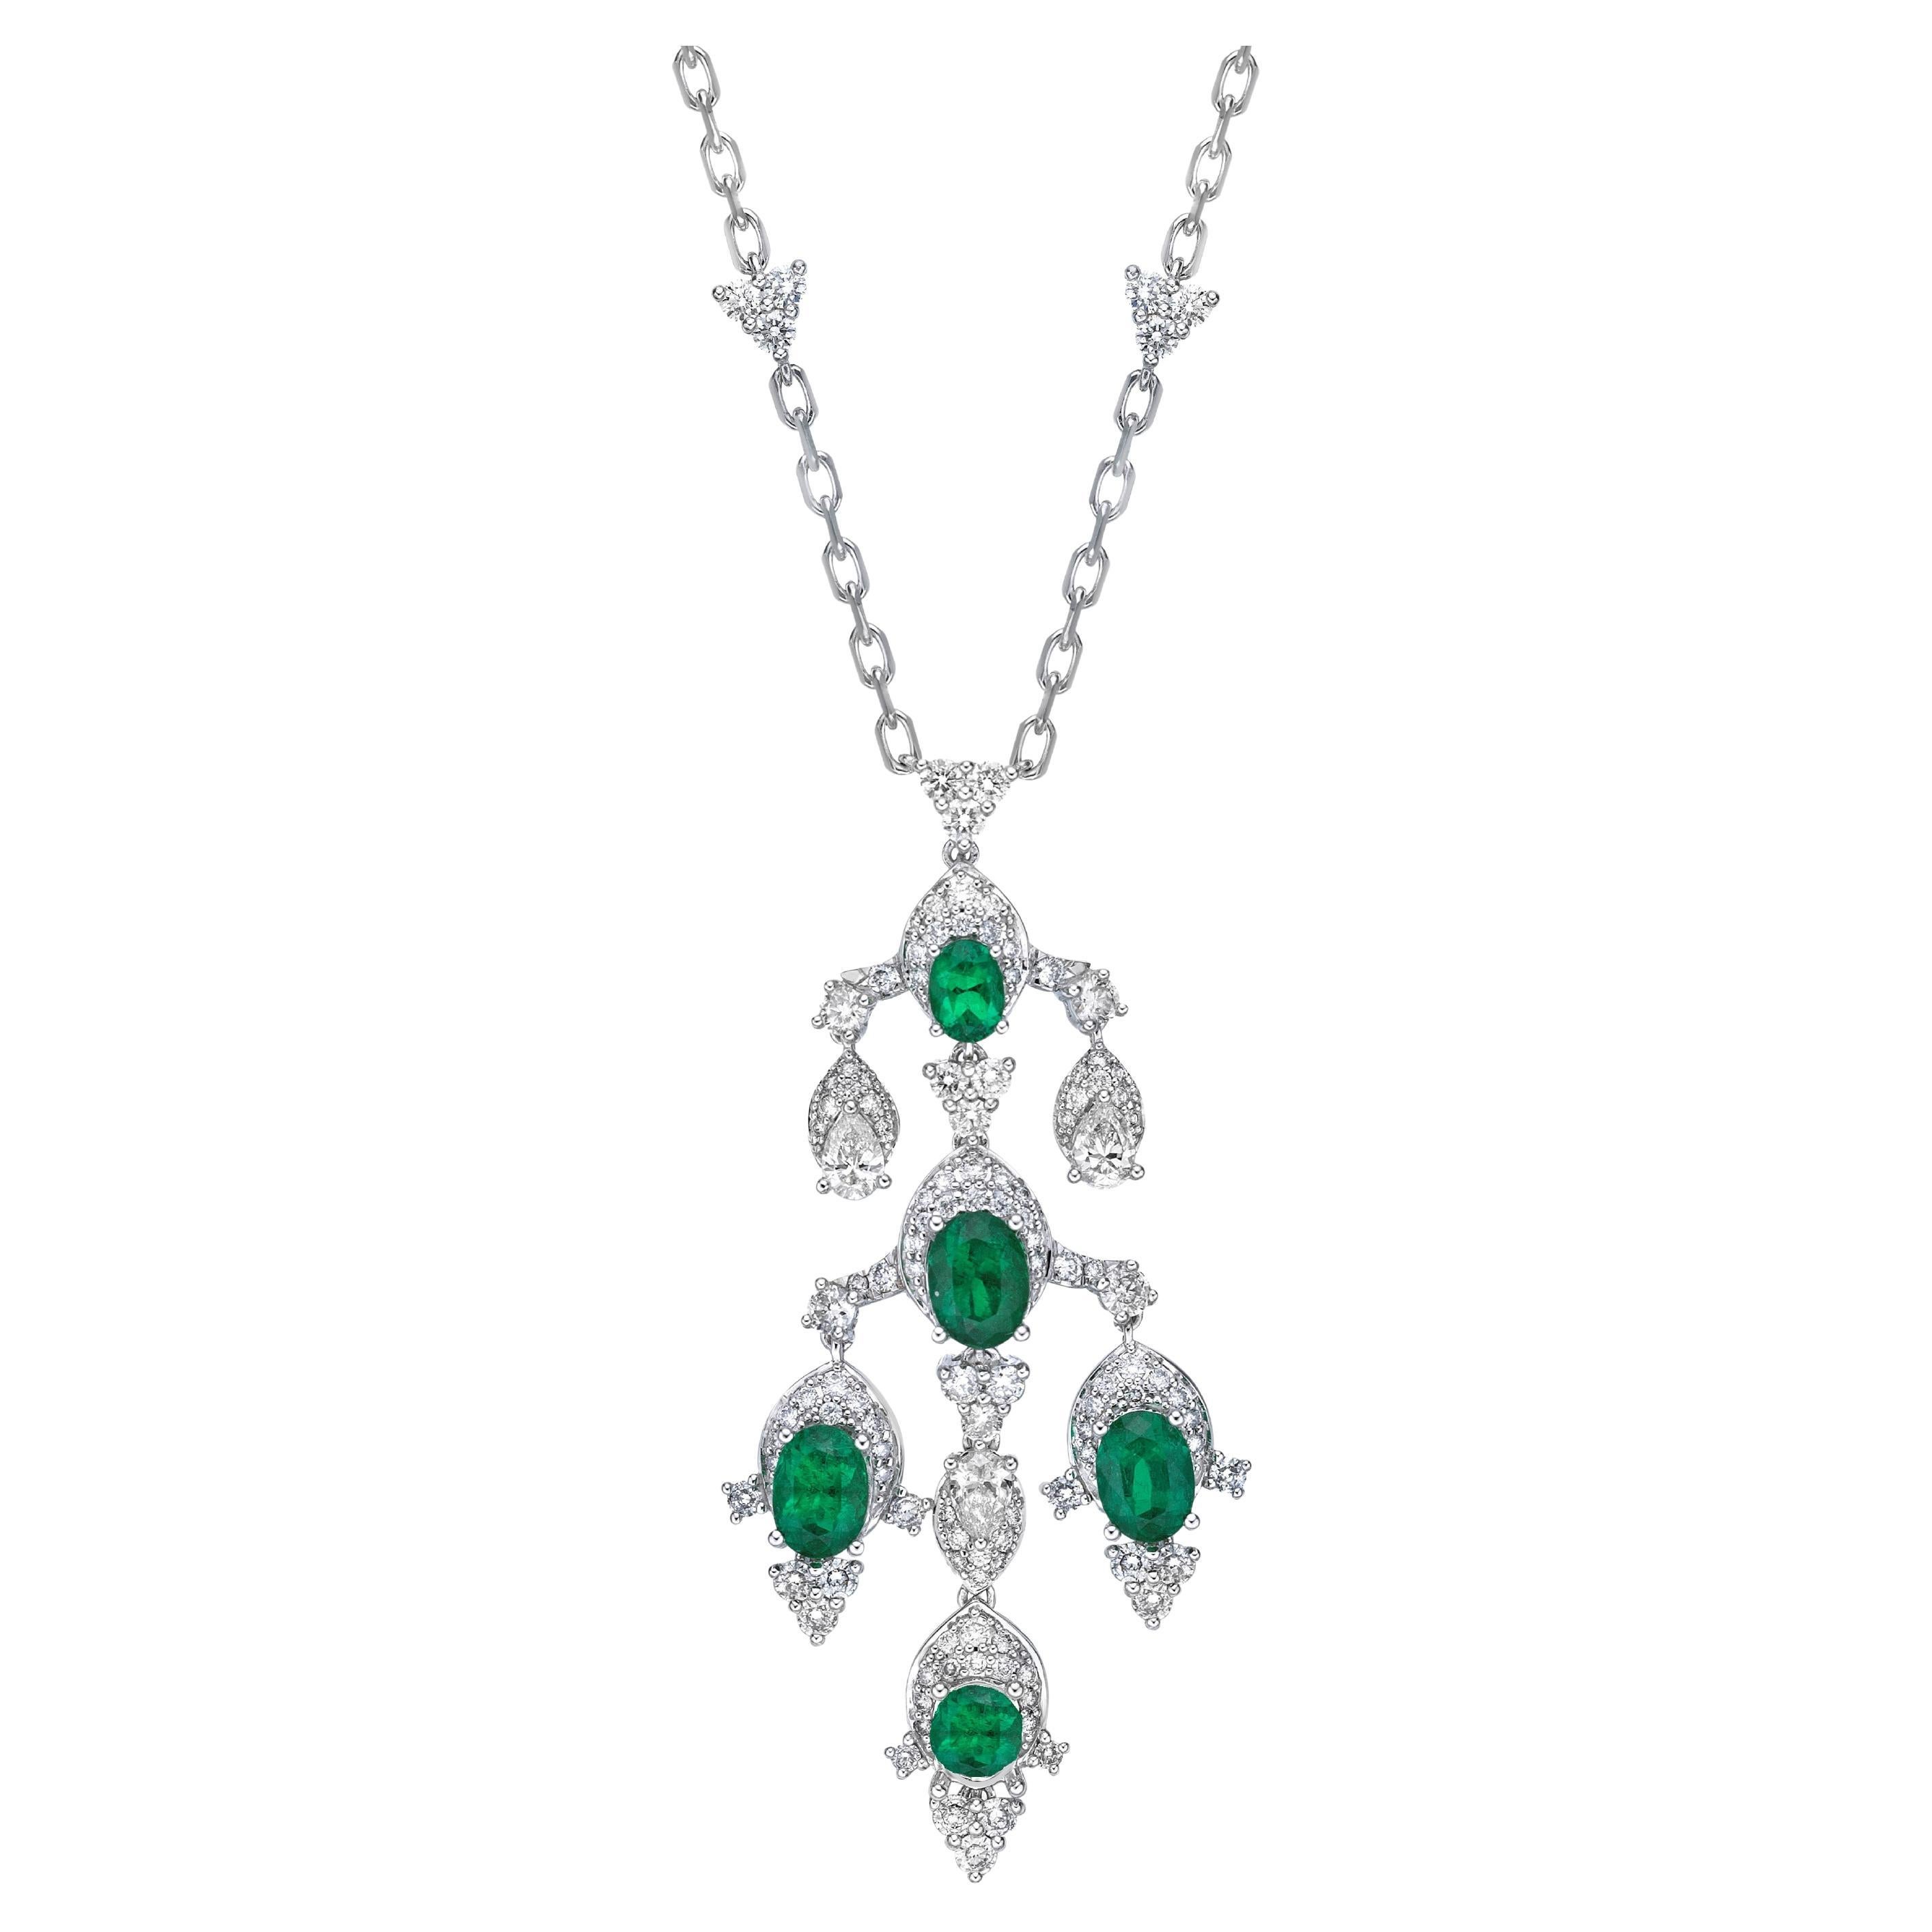 Contemporary Emerald and Diamond Necklace in 18Karat White Gold. For Sale